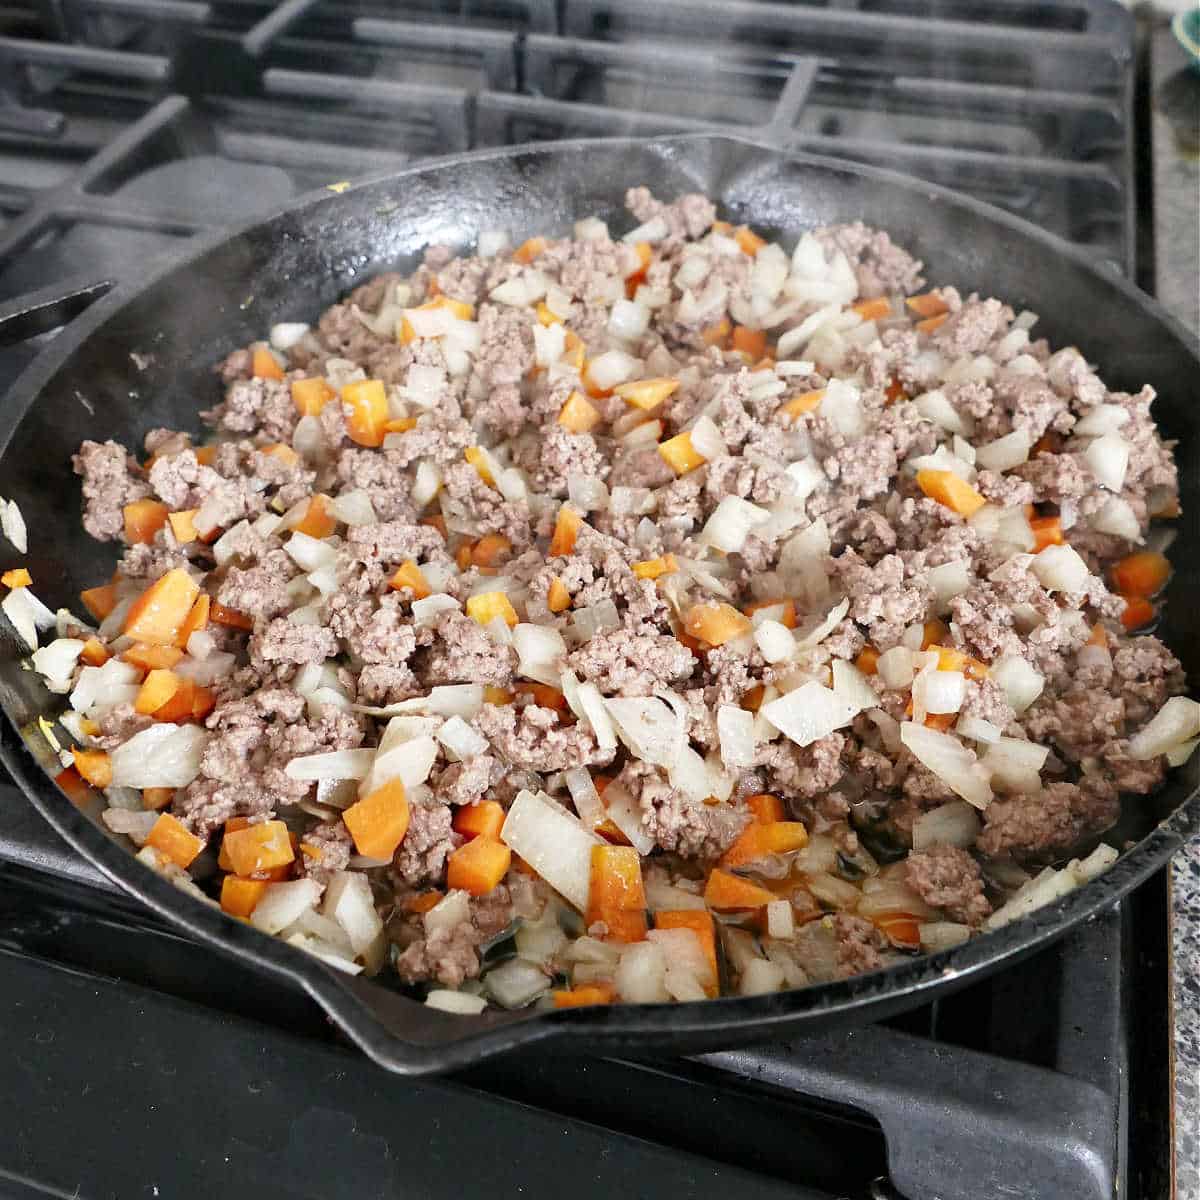 chopped vegetables and ground beef cooking in a cast iron skillet